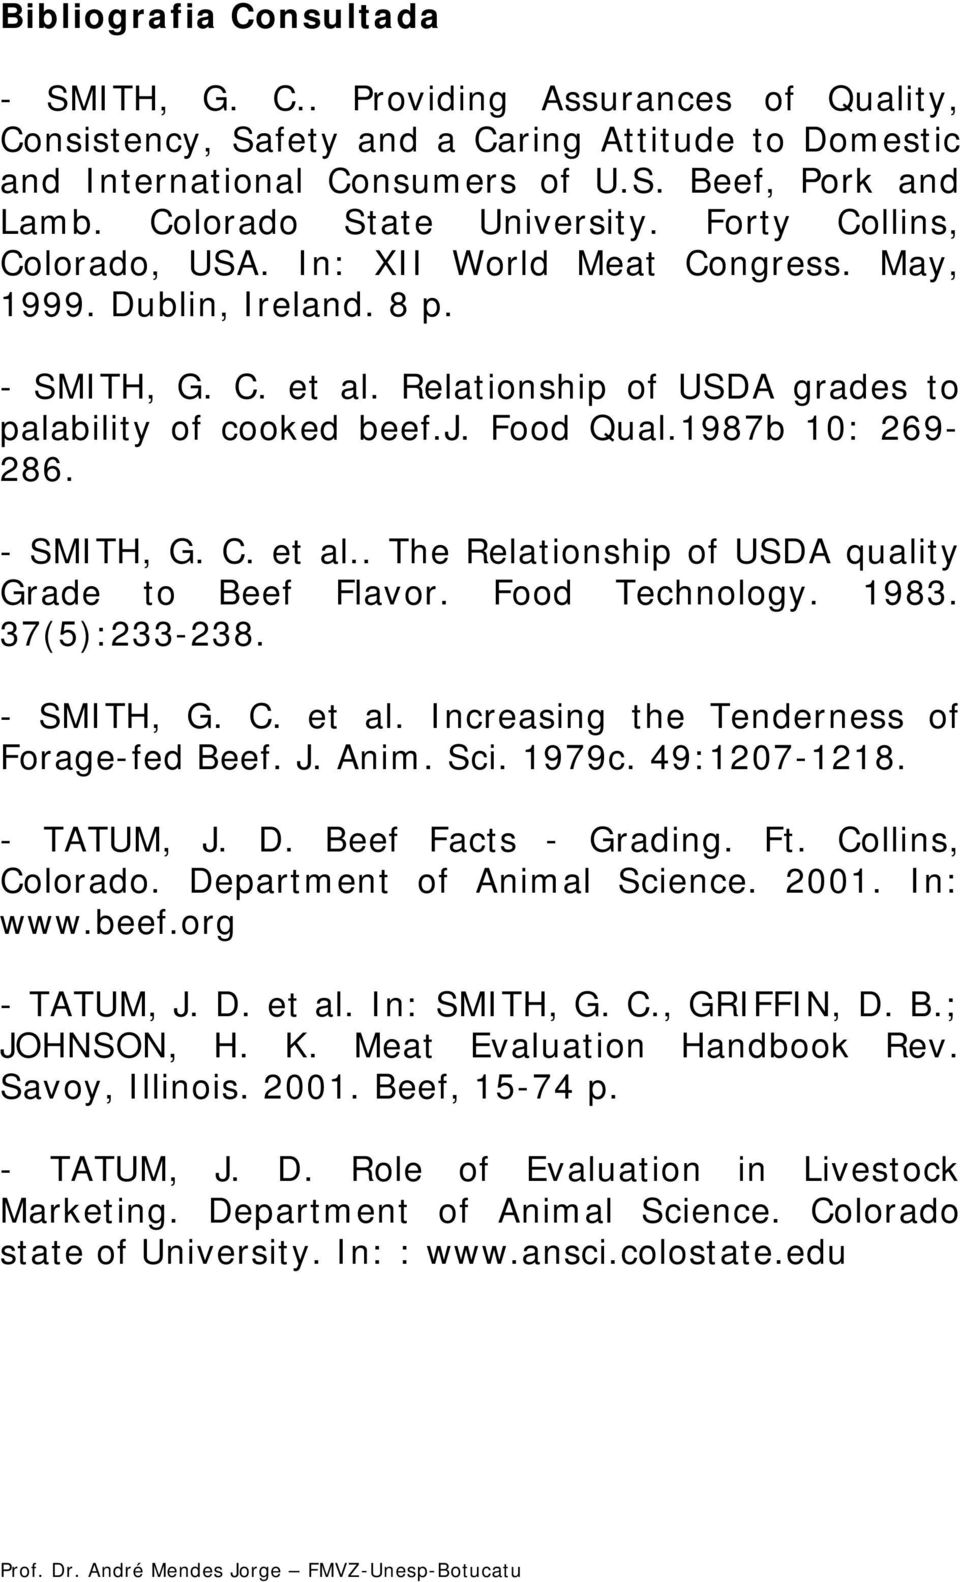 Food Qual.1987b 10: 269-286. - SMITH, G. C. et al.. The Relationship of USDA quality Grade to Beef Flavor. Food Technology. 1983. 37(5):233-238. - SMITH, G. C. et al. Increasing the Tenderness of Forage-fed Beef.